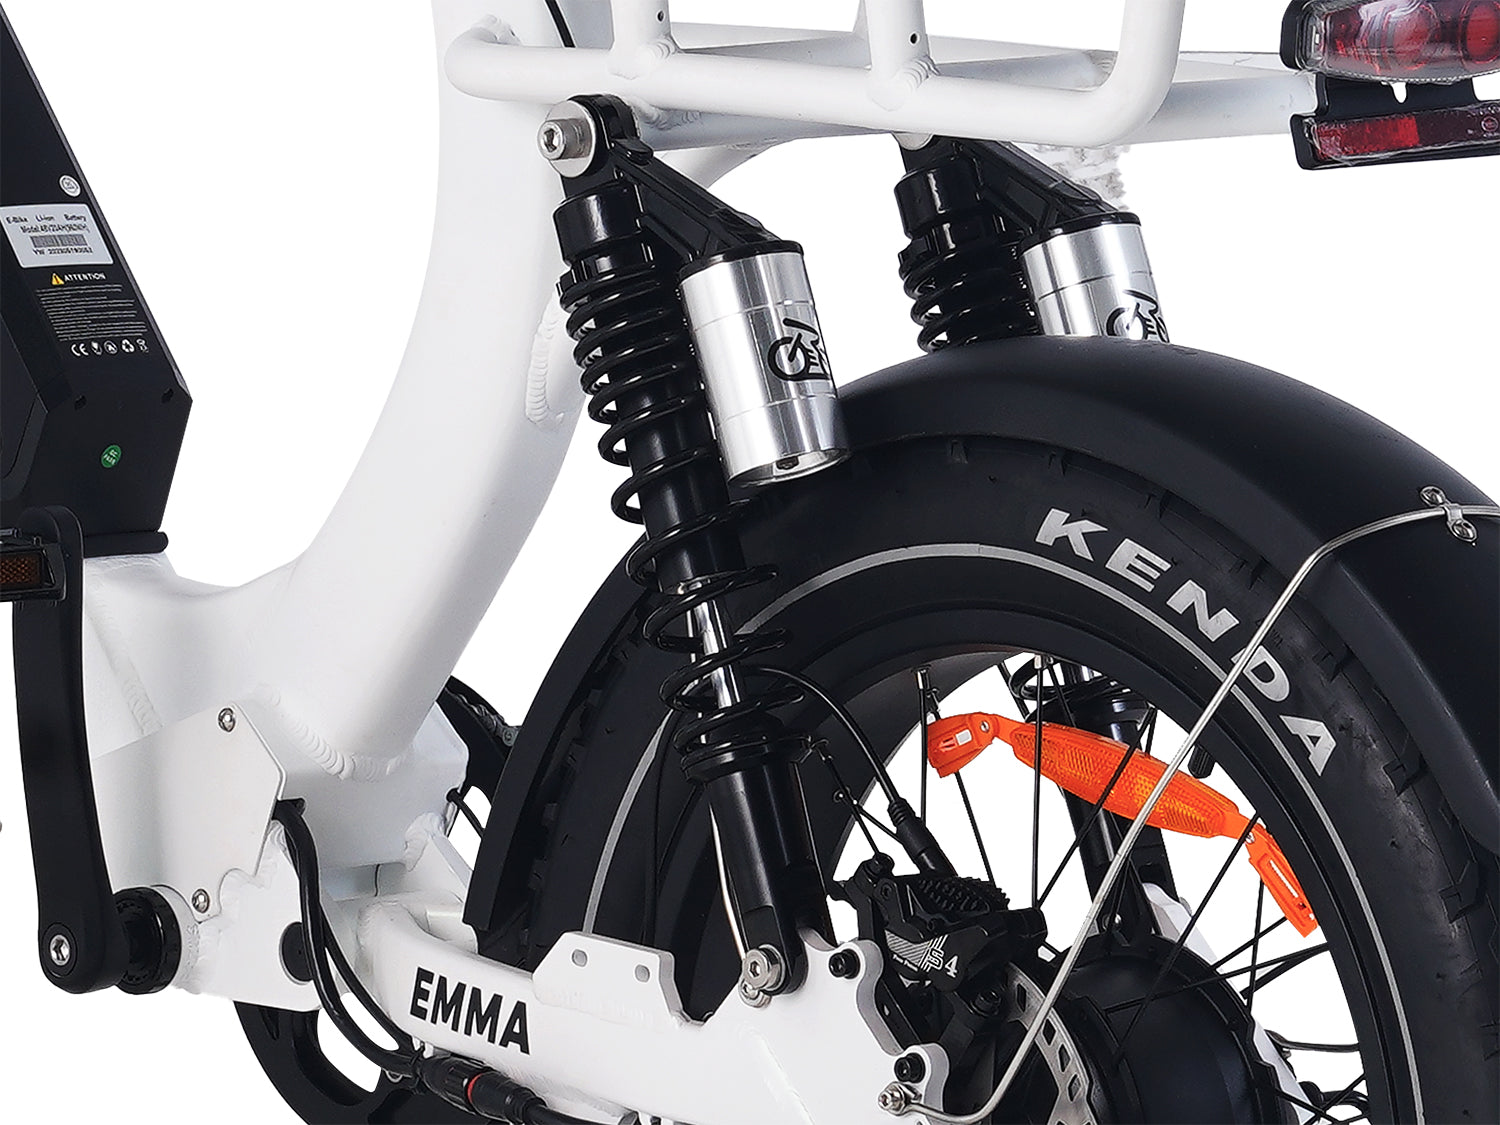 EMMA Long Range |Moped-style Ebike for Adults|400LB Heavy Rider|Step Through Electric Bike 9